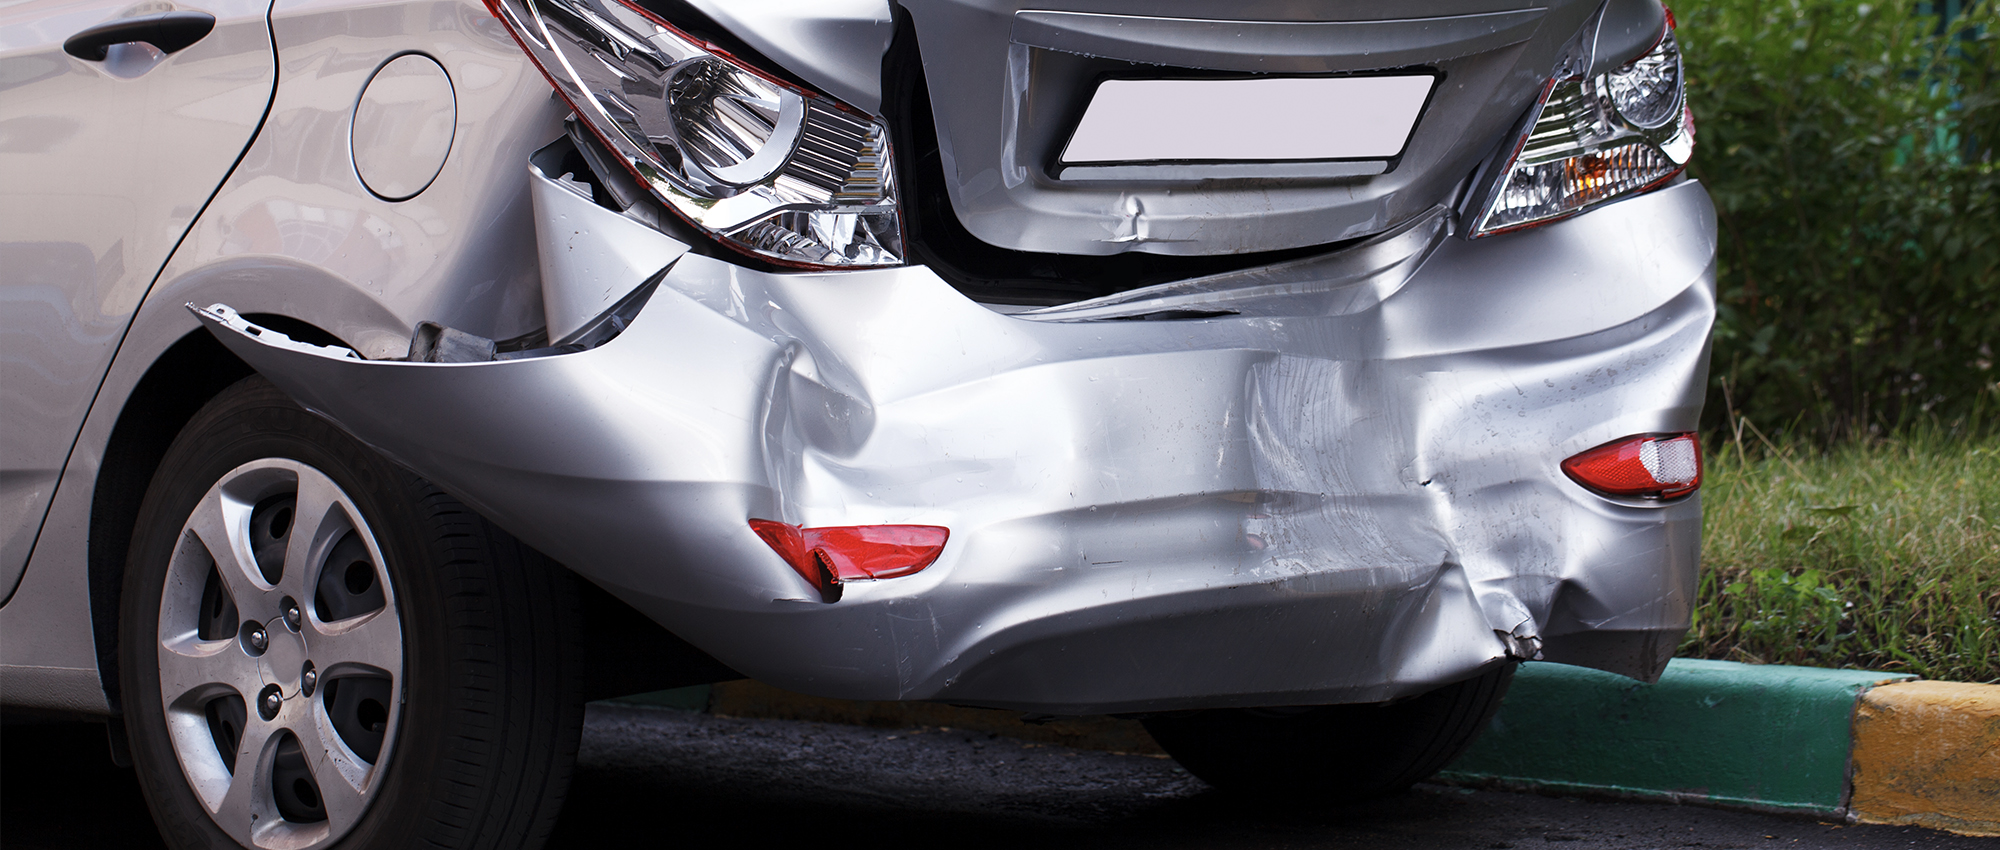 car-accident-rear-end